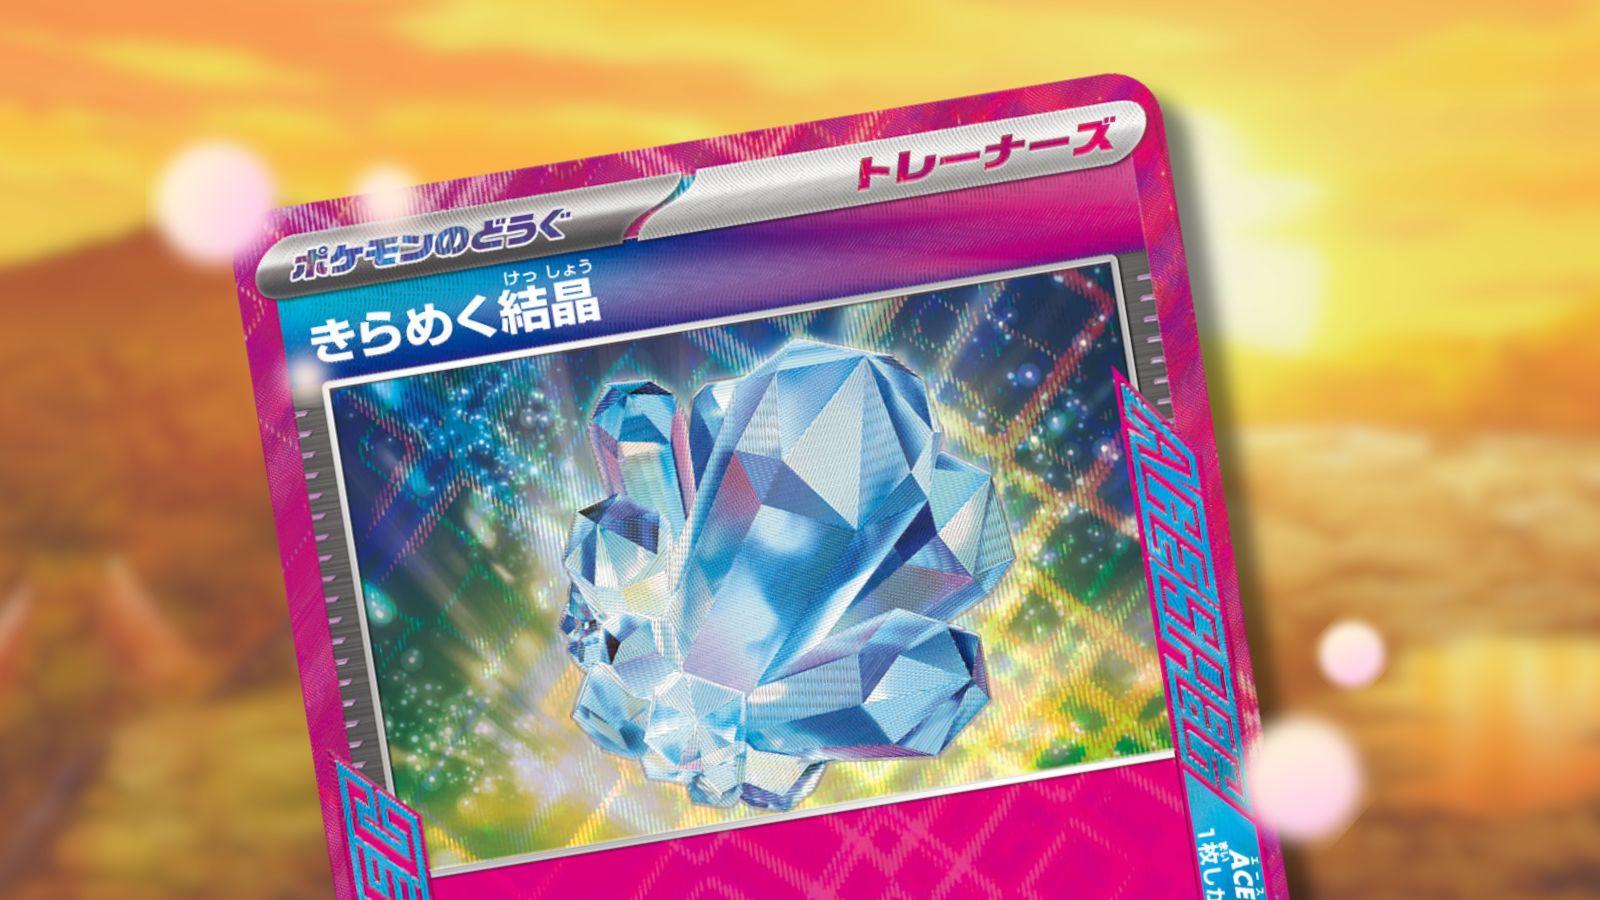 Sparkling Crystal ACE SPEC Pokemon card with sparkles and anime background.